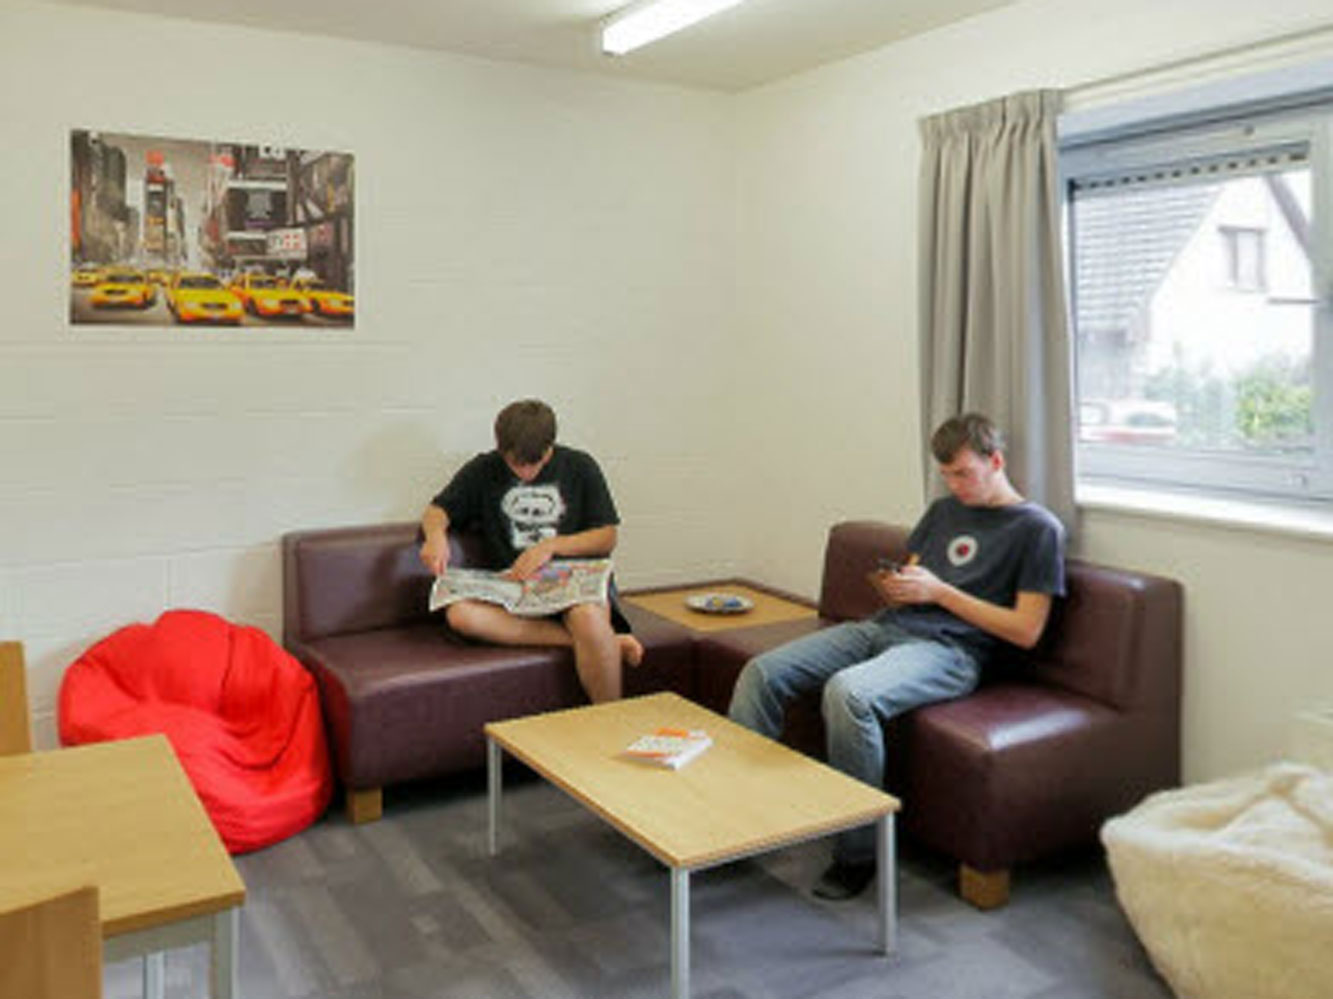 two students sitting in the lounge area, one reading from a newspaper and one using their phone